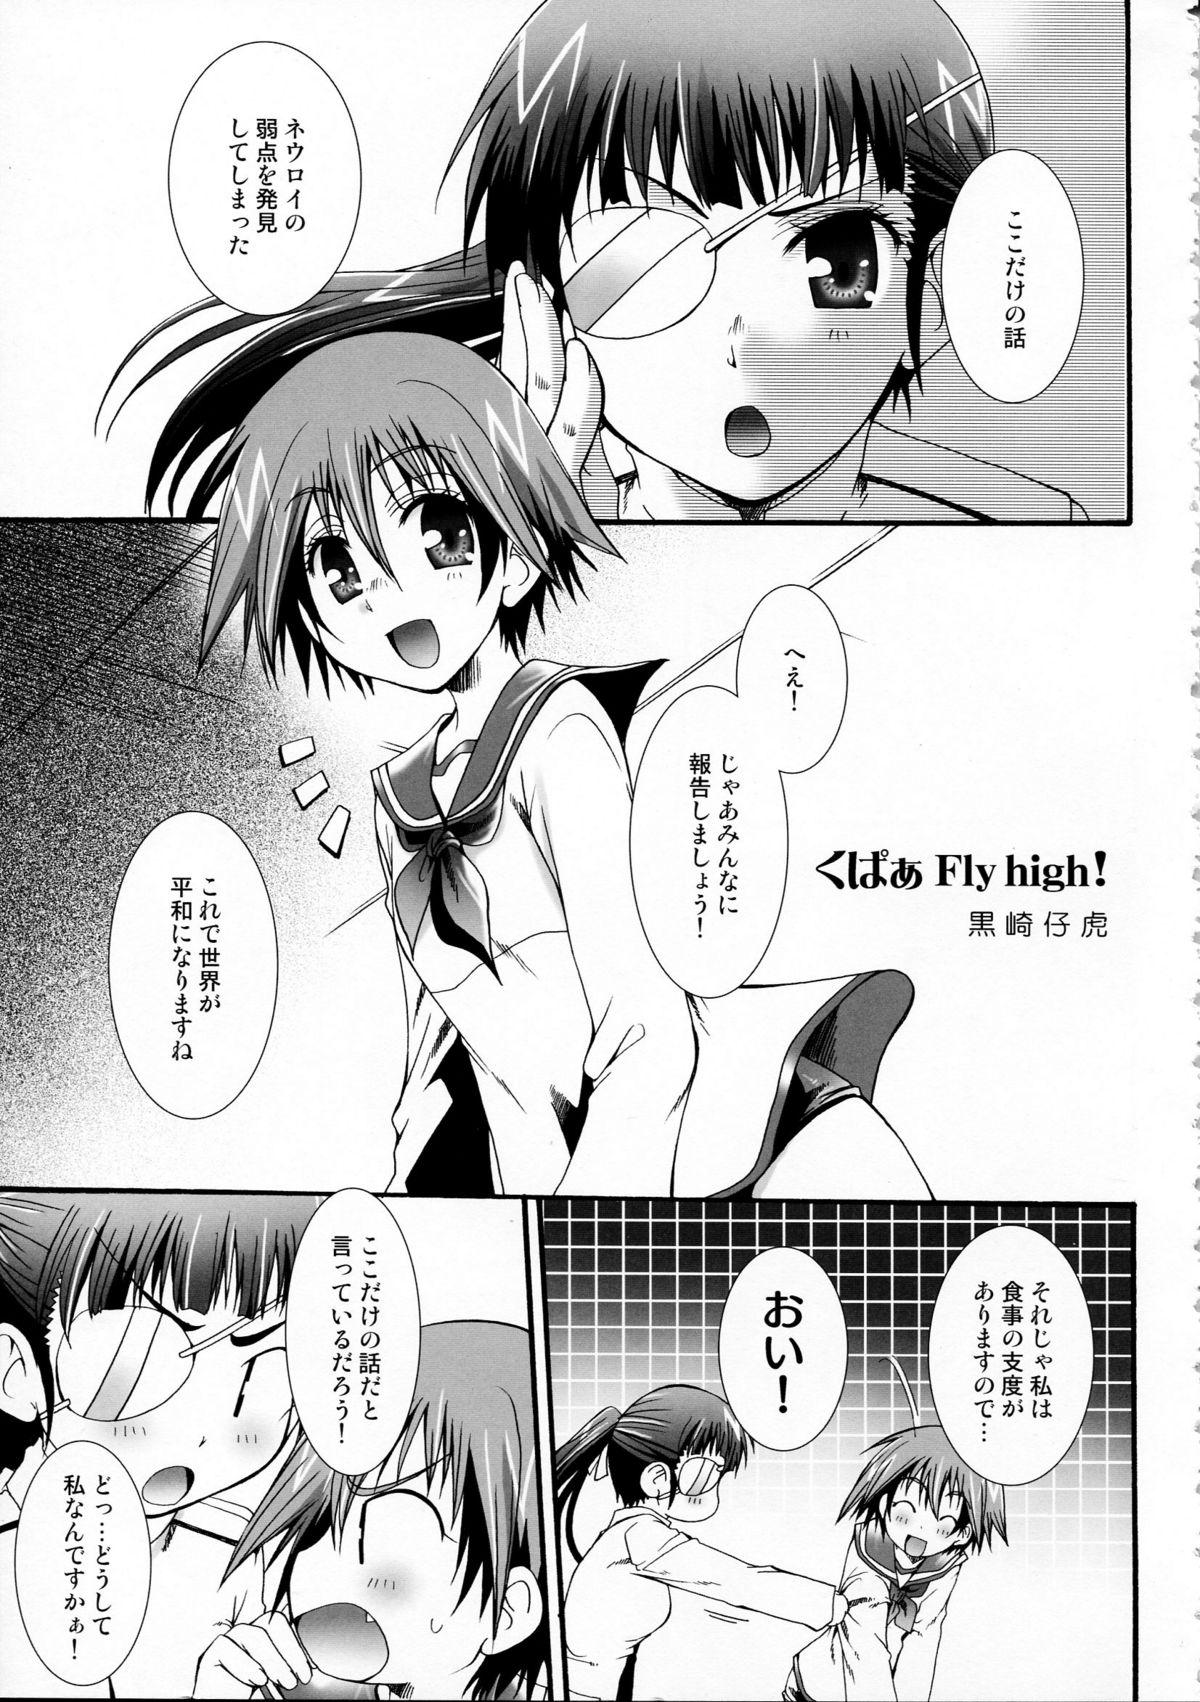 Rub THE Pants ja nai mon! 2 - Strike witches Couch - Page 5